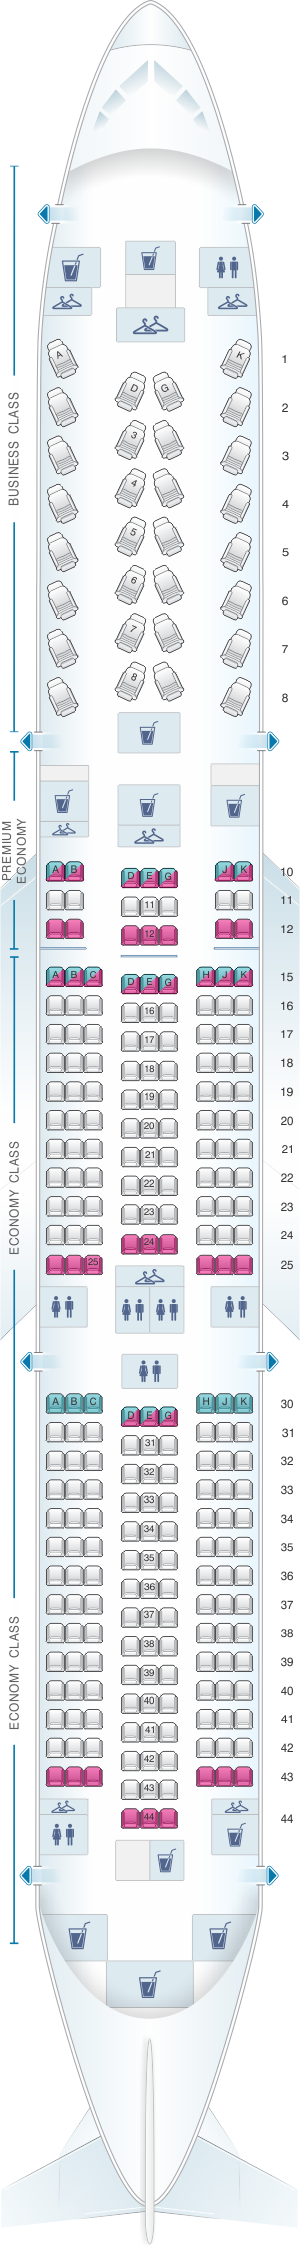 Seat map for Air France Boeing B787-9